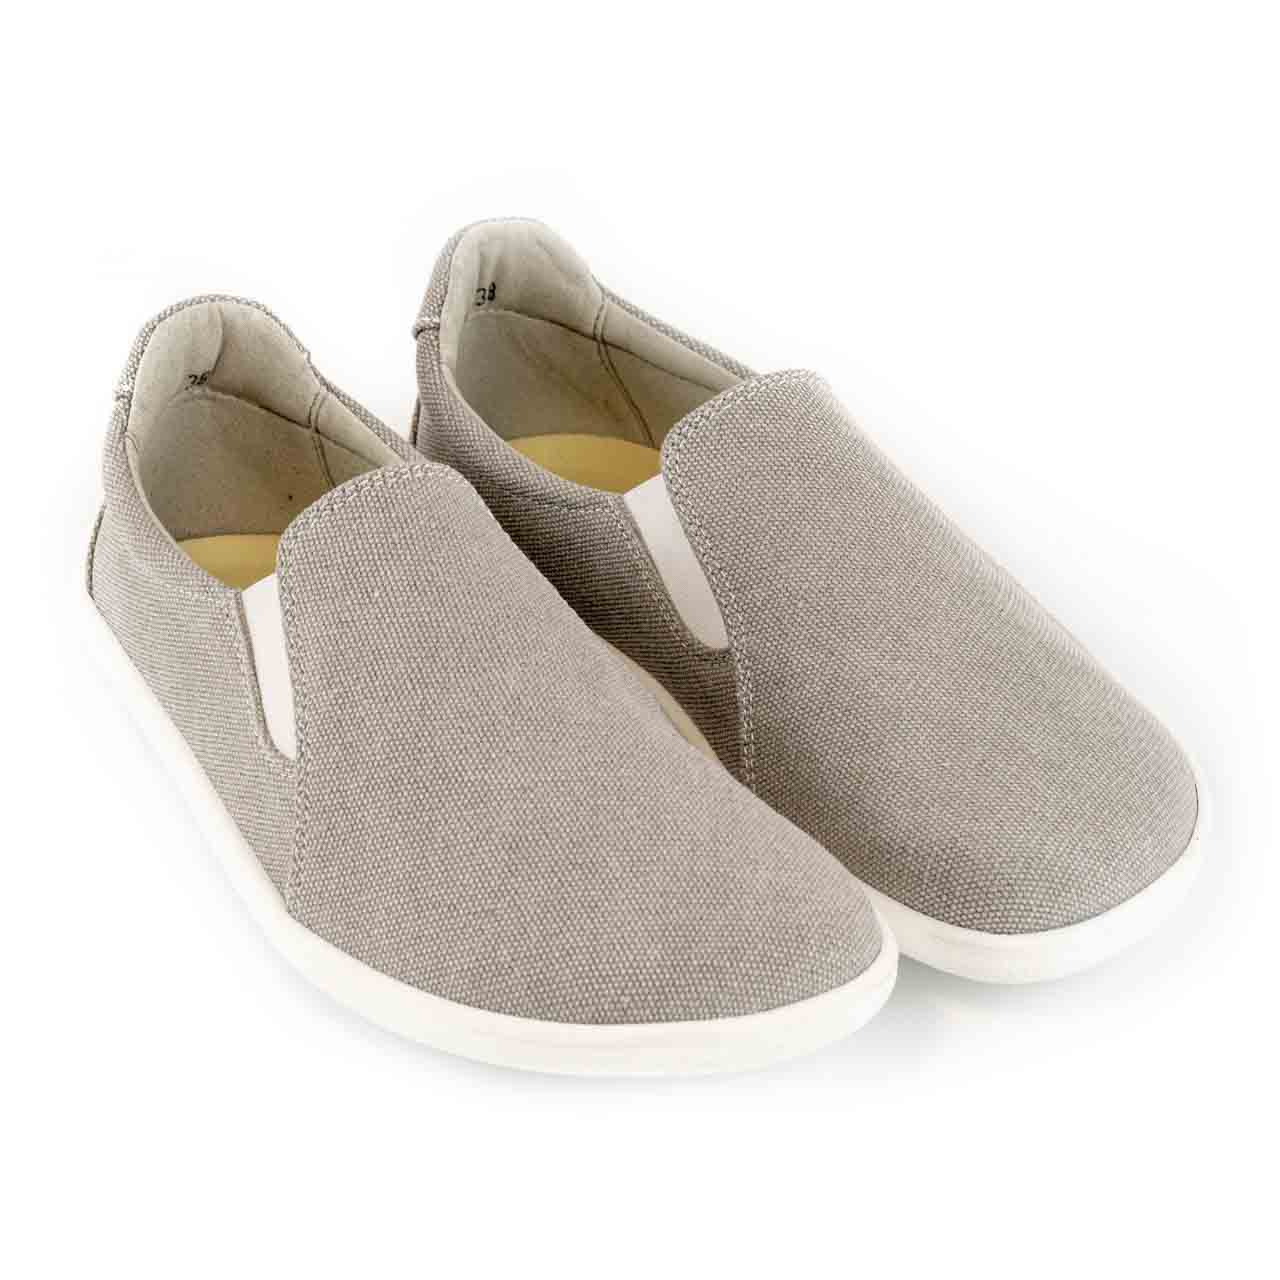 A photo of Belenka Eazy slip-on sneakers made from canvas and rubber soles. The sneakers are a sand color with white elastic on the sides and soles. Both shoes are shown beside each other facing the front and slightly angled to the right against a white background. #color_sand